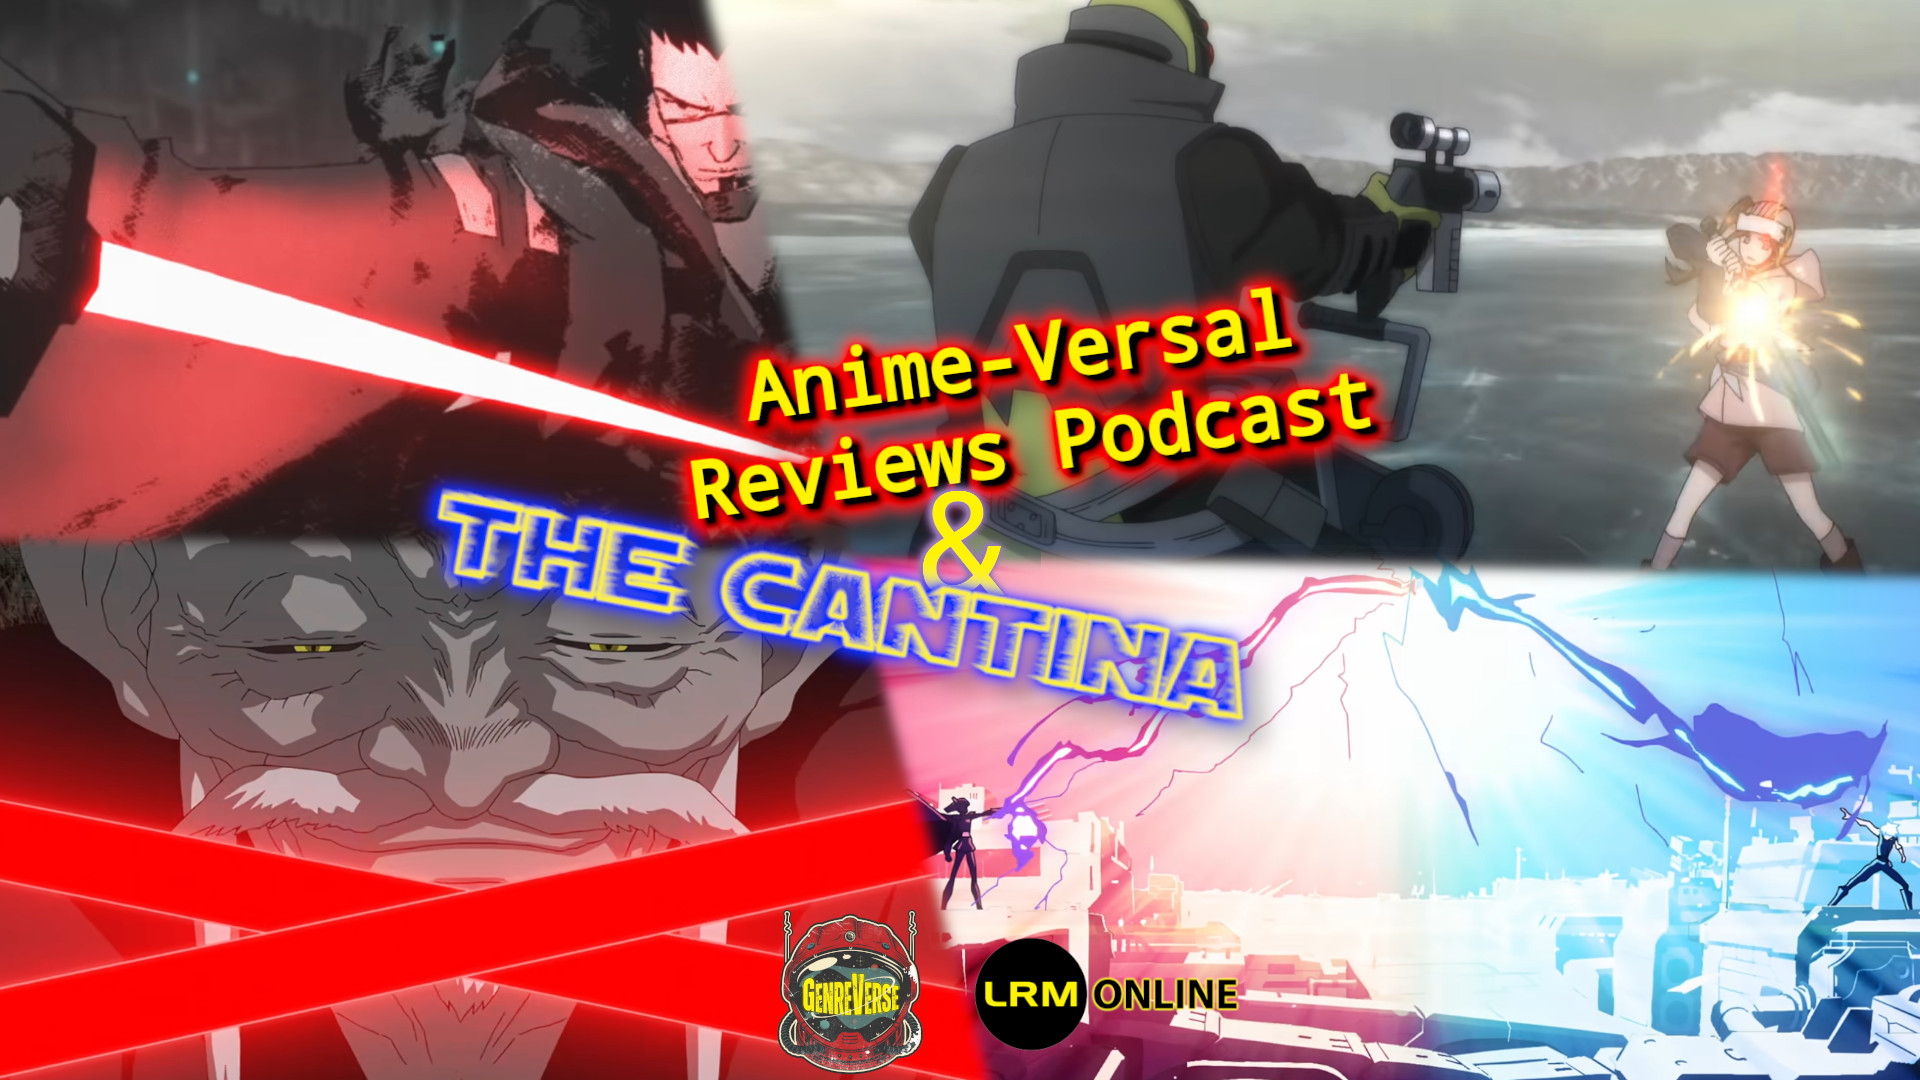 Star Wars Visions Review And Discussion A Dream Come True Anime-Versal Reviews Podcast And The Cantina Special